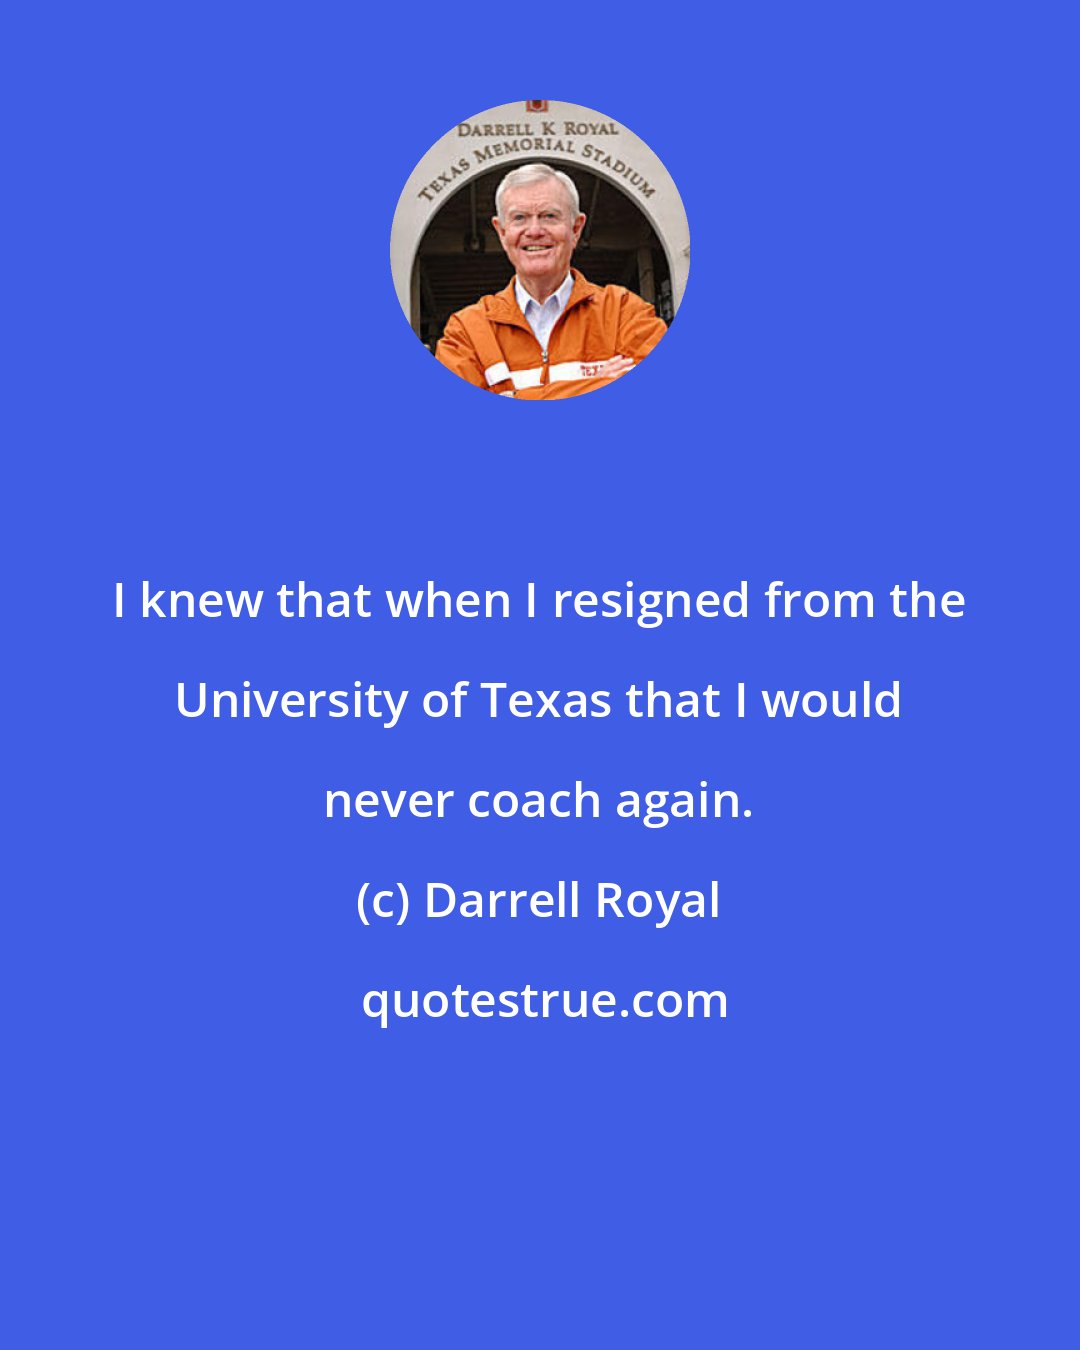 Darrell Royal: I knew that when I resigned from the University of Texas that I would never coach again.